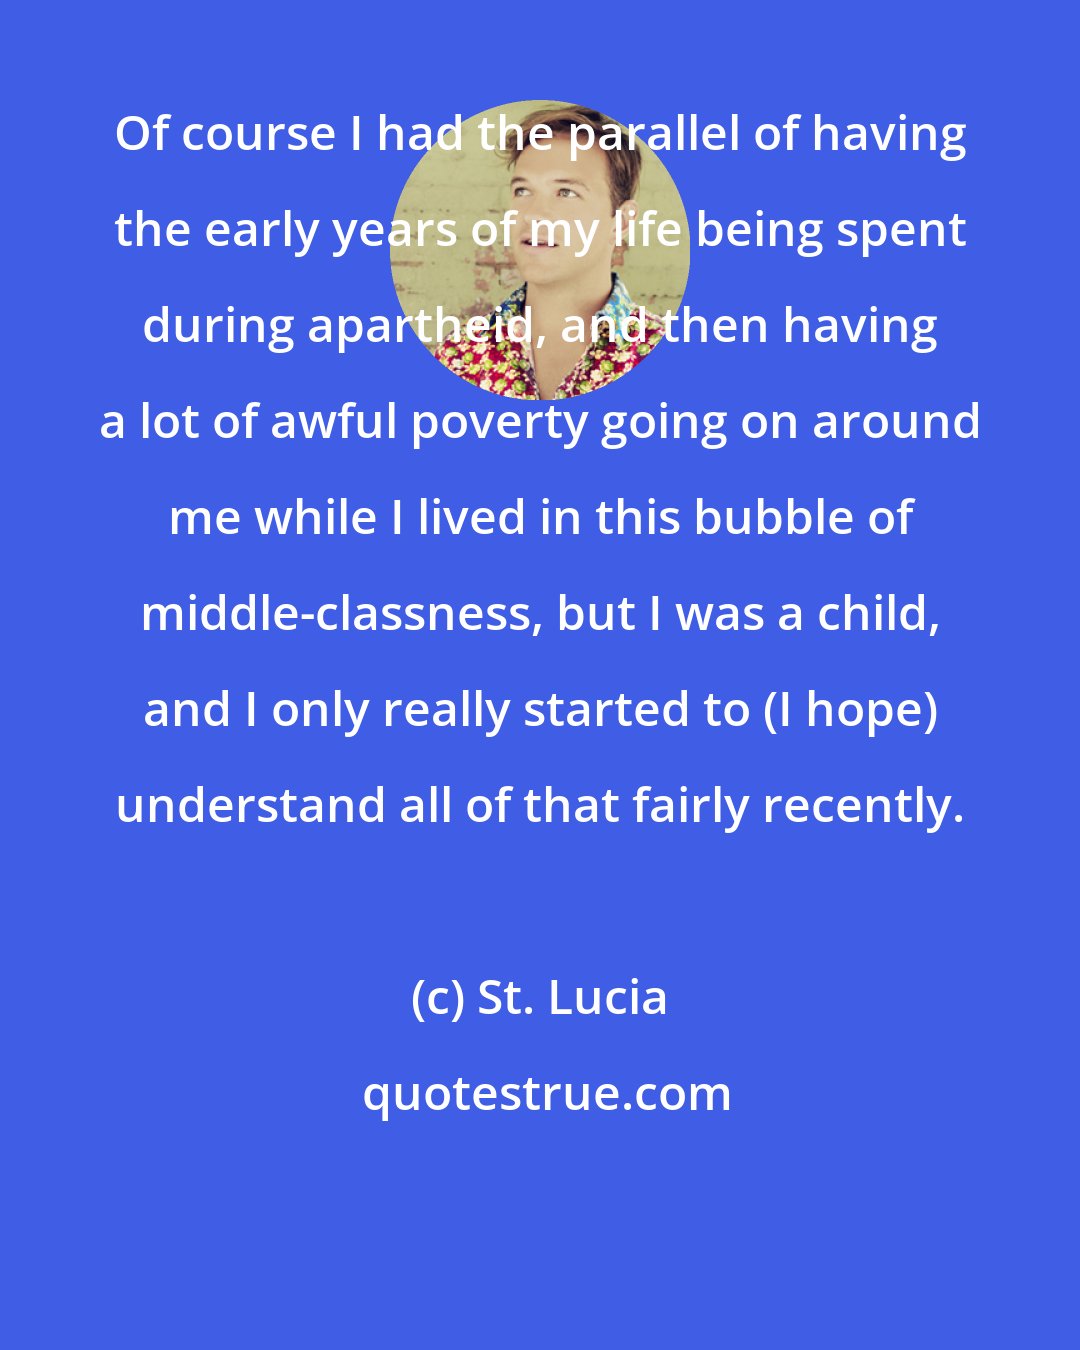 St. Lucia: Of course I had the parallel of having the early years of my life being spent during apartheid, and then having a lot of awful poverty going on around me while I lived in this bubble of middle-classness, but I was a child, and I only really started to (I hope) understand all of that fairly recently.